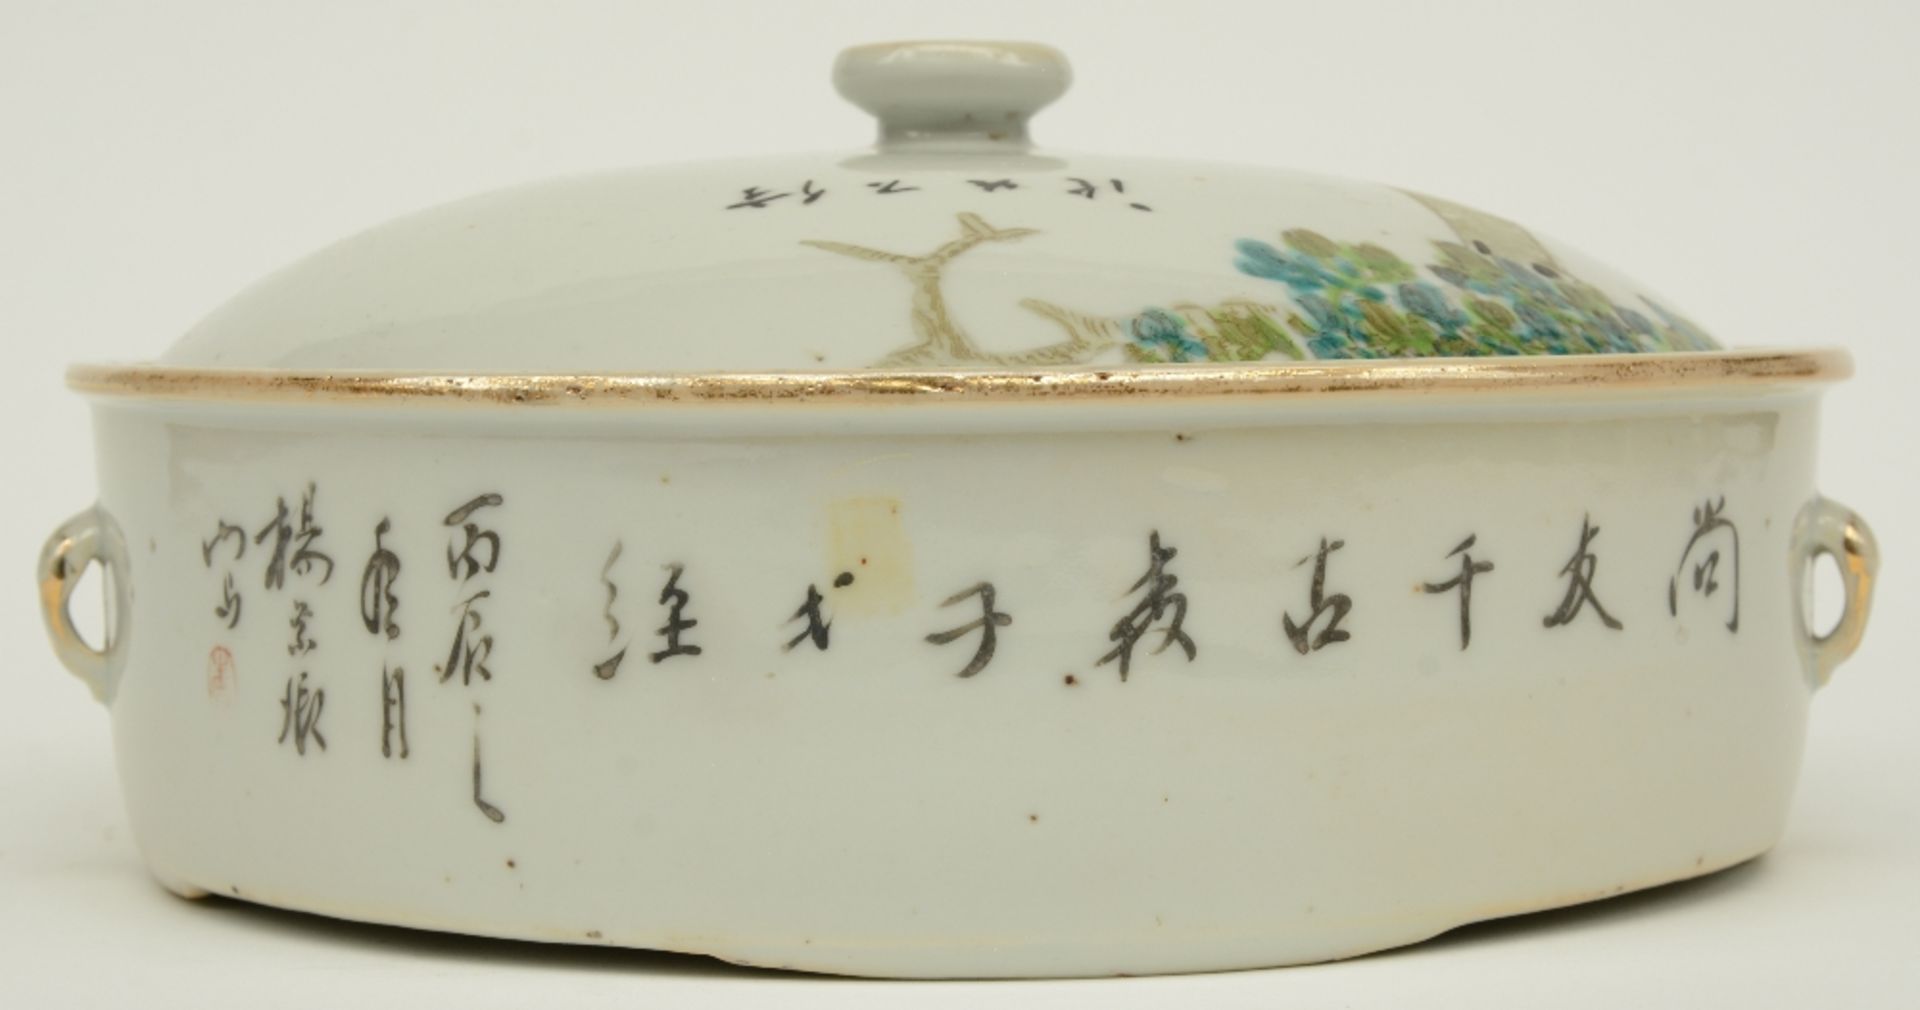 A Chinese bowl with cover, polychrome decorated with figures, H 11,5 - Diameter 24,5 cm - Bild 4 aus 8